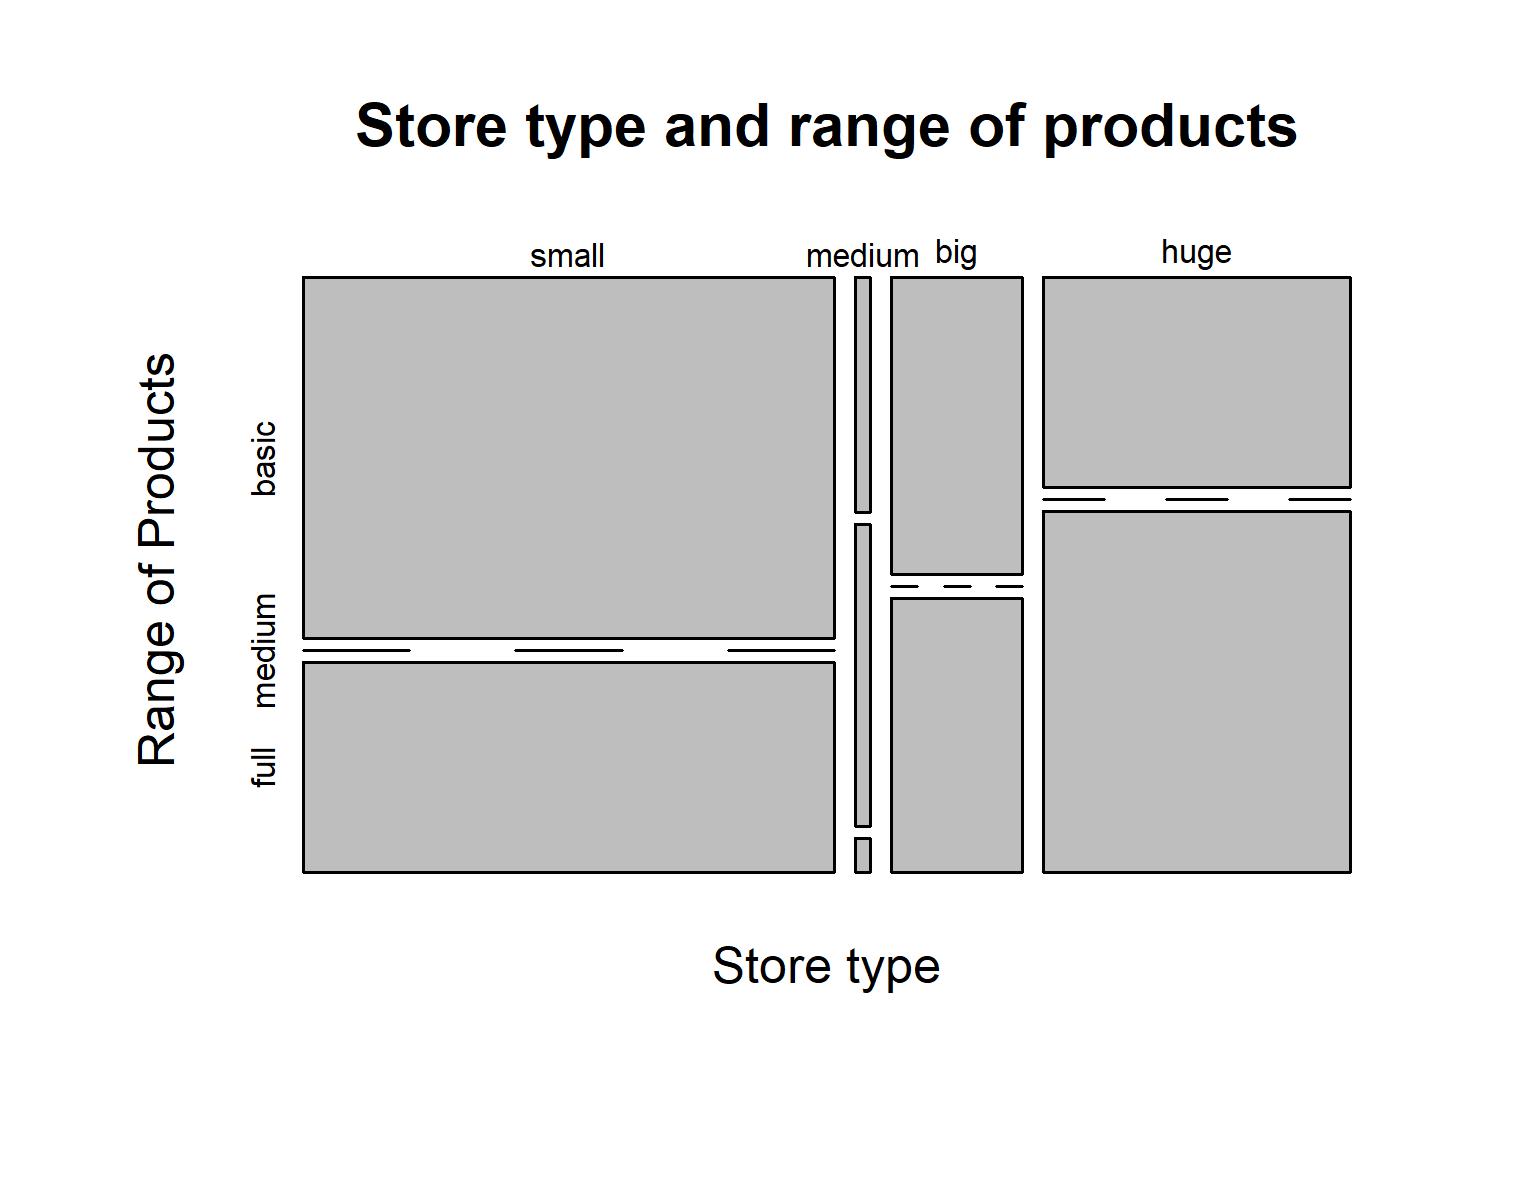 Store type and range of products